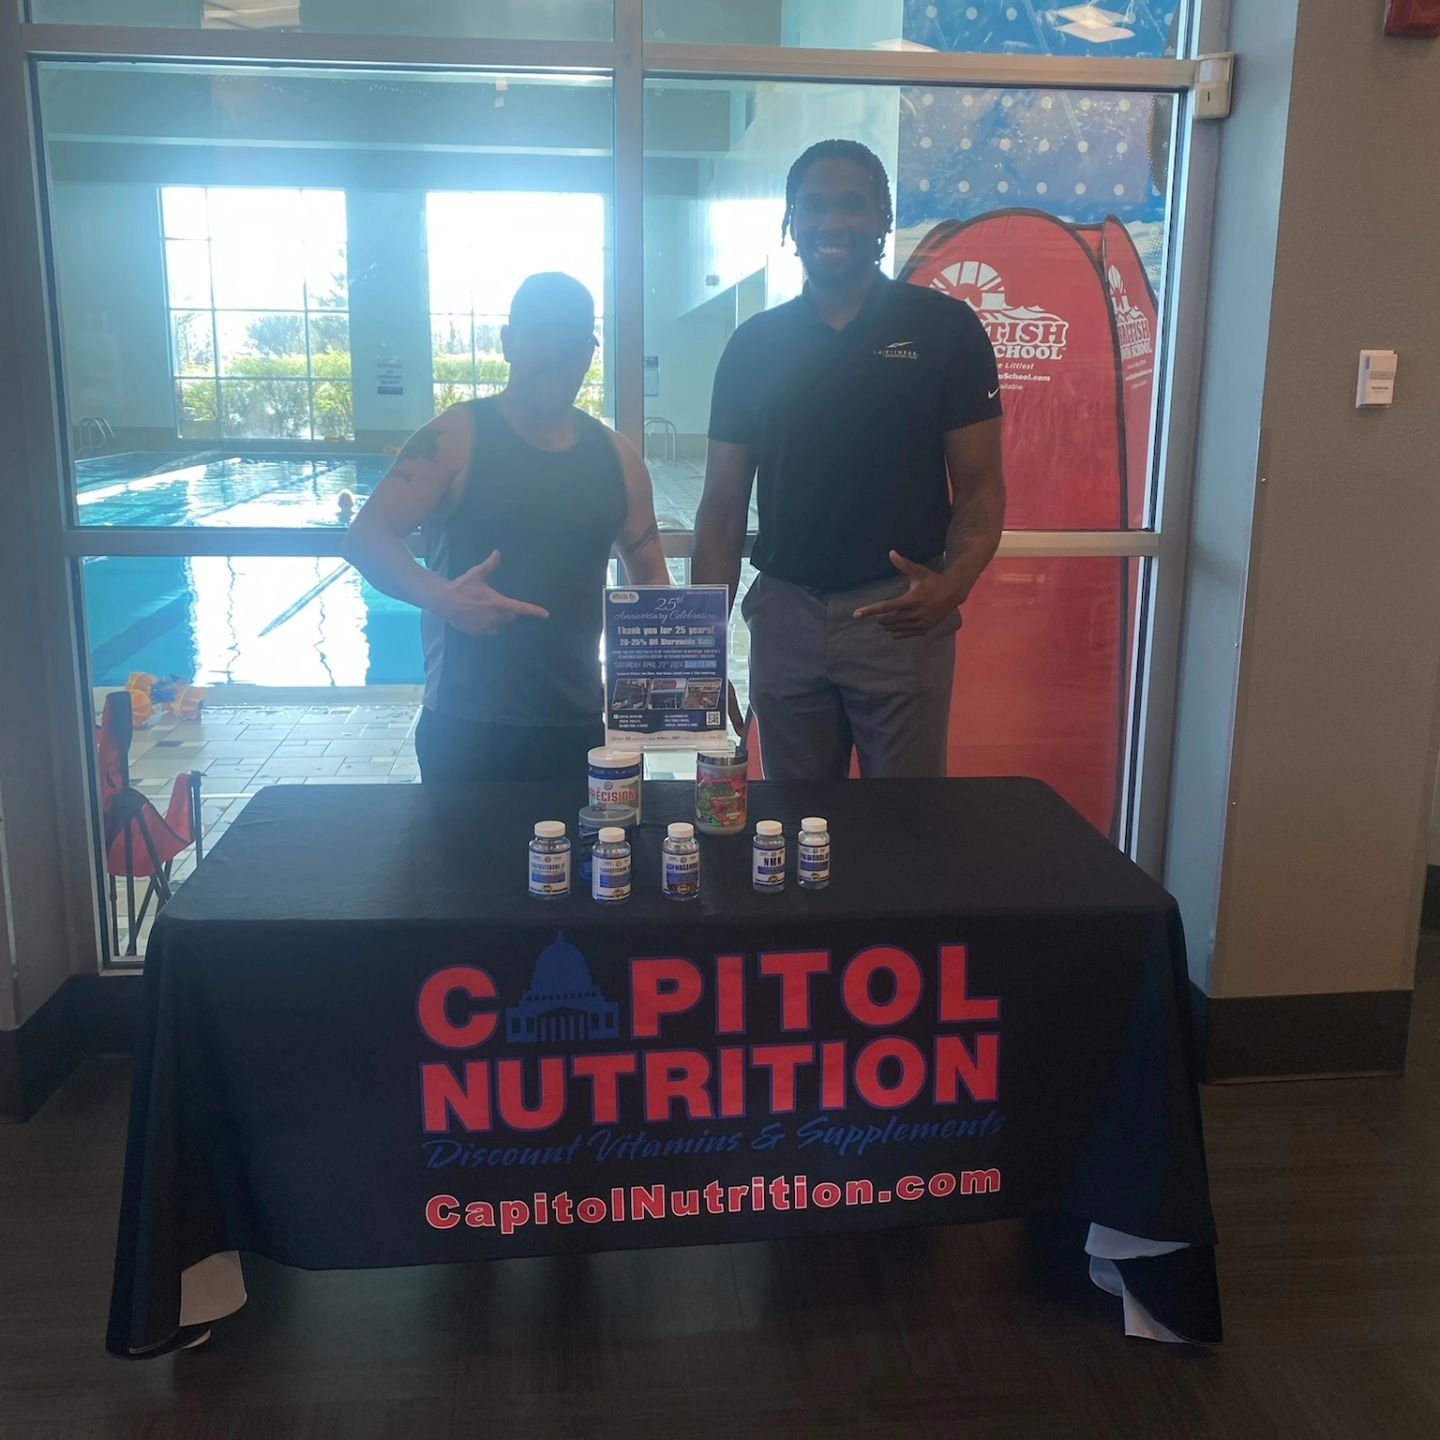 Phil out at @lafitness_tinleypark 
Jack at @newlenox_lafitness 

During the @lafitness Member Appreciation, passing out samples and letting everyone know about the 25th Anniversary Event happening this Saturday, April 20th, 9am to 6pm.
Everything 20 